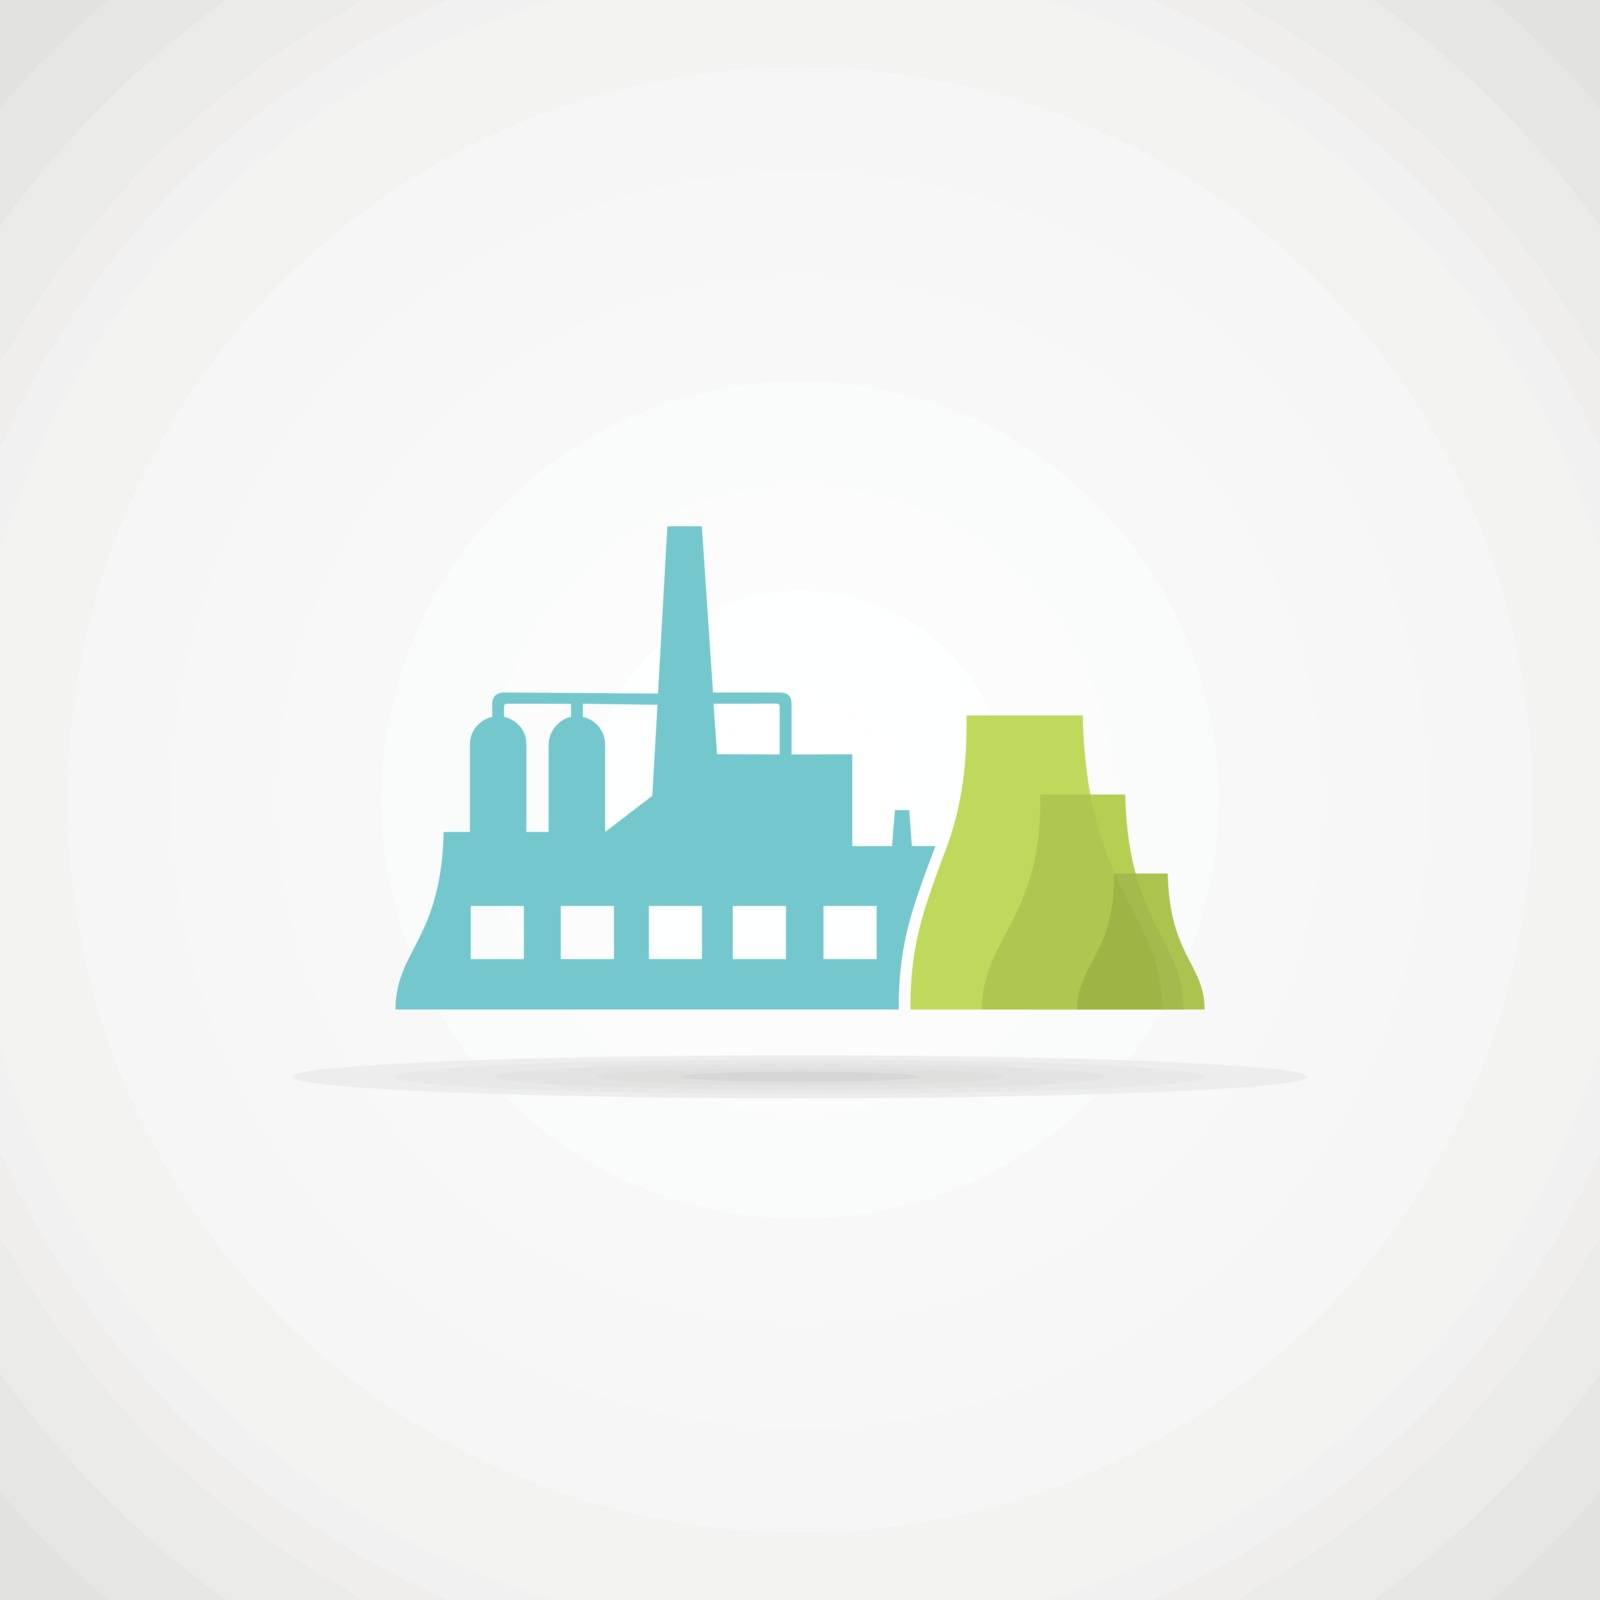 The industrial factory. Vector illustration